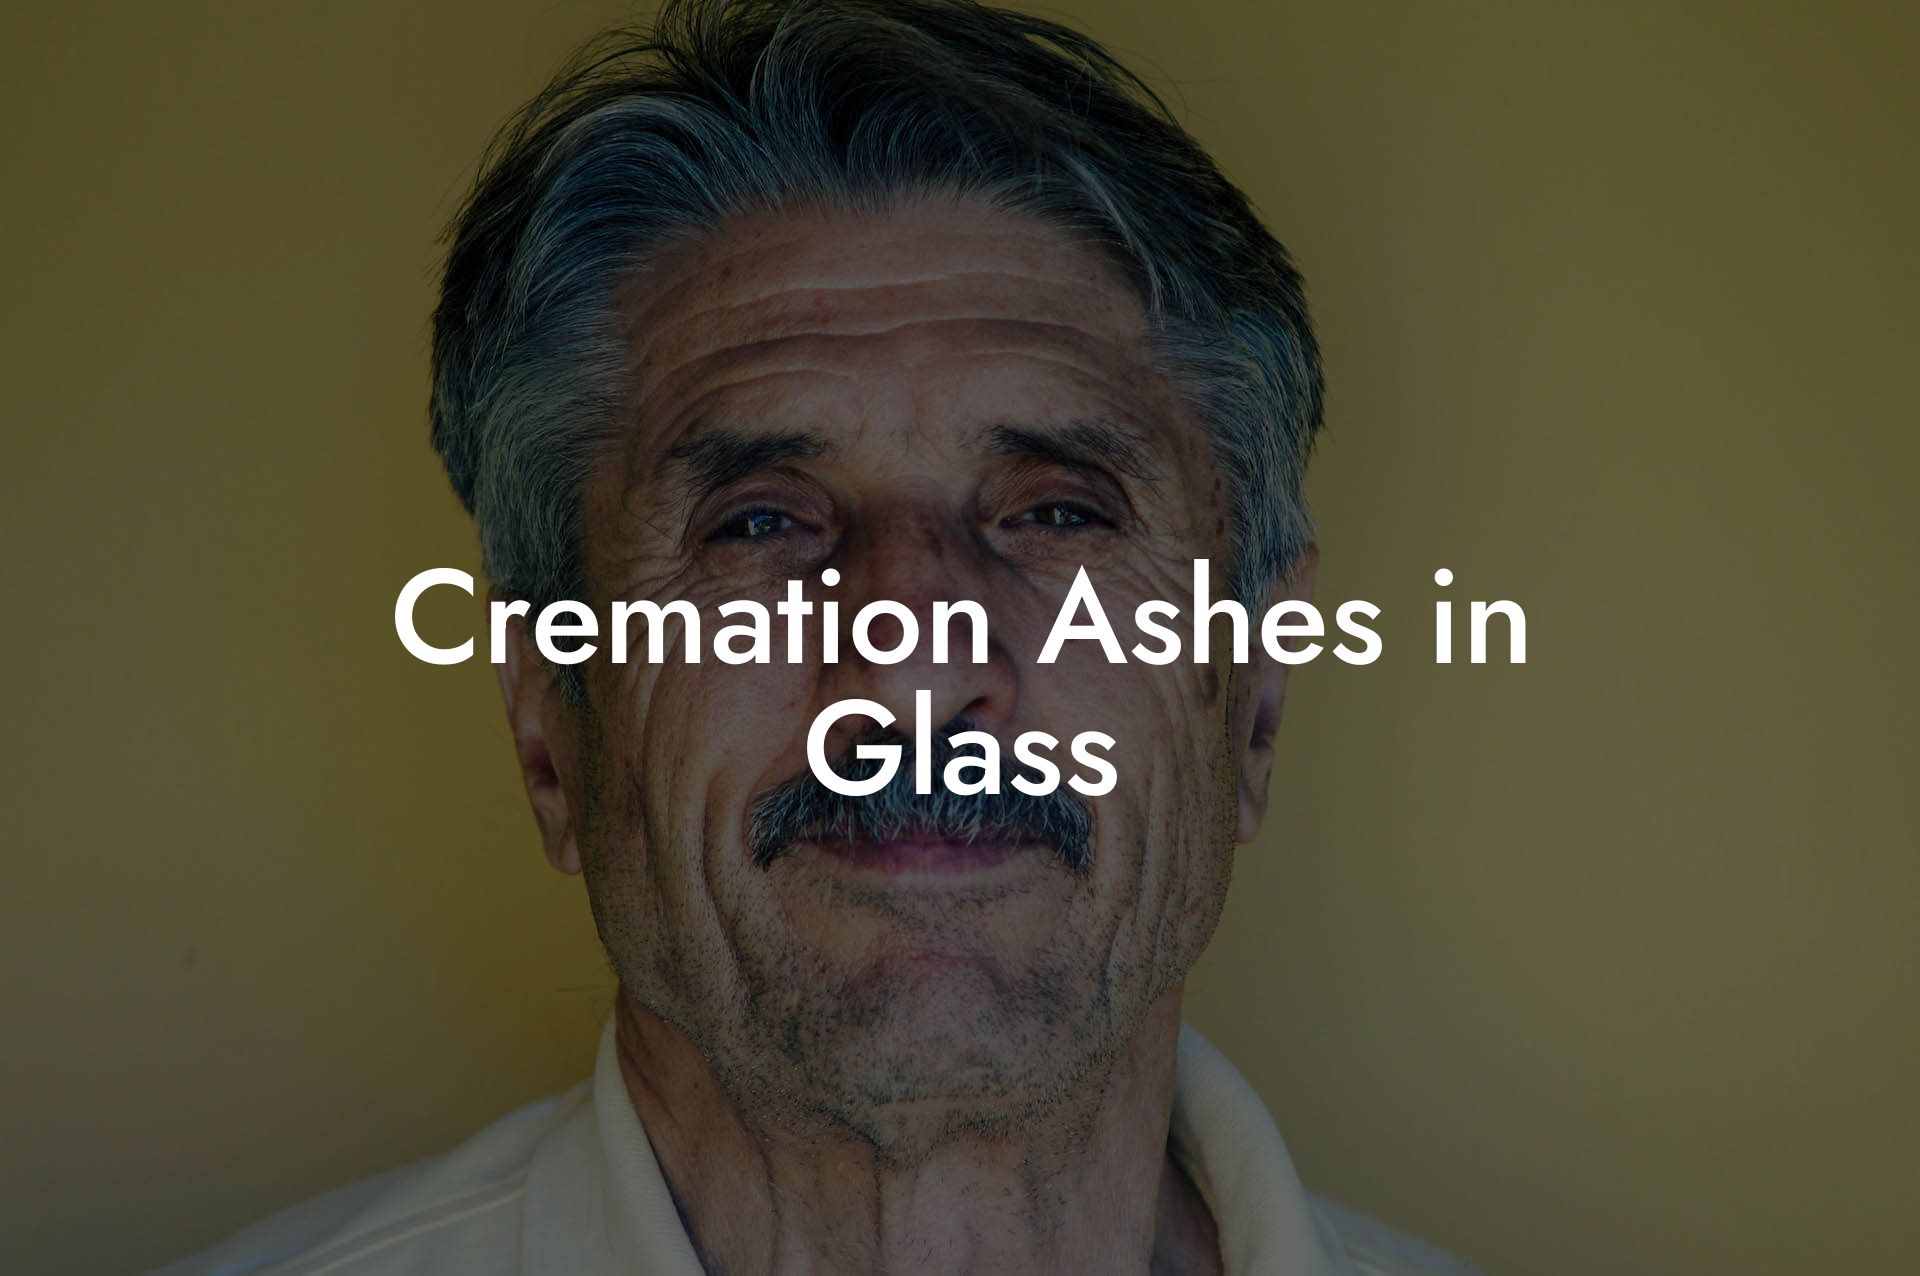 Cremation Ashes in Glass